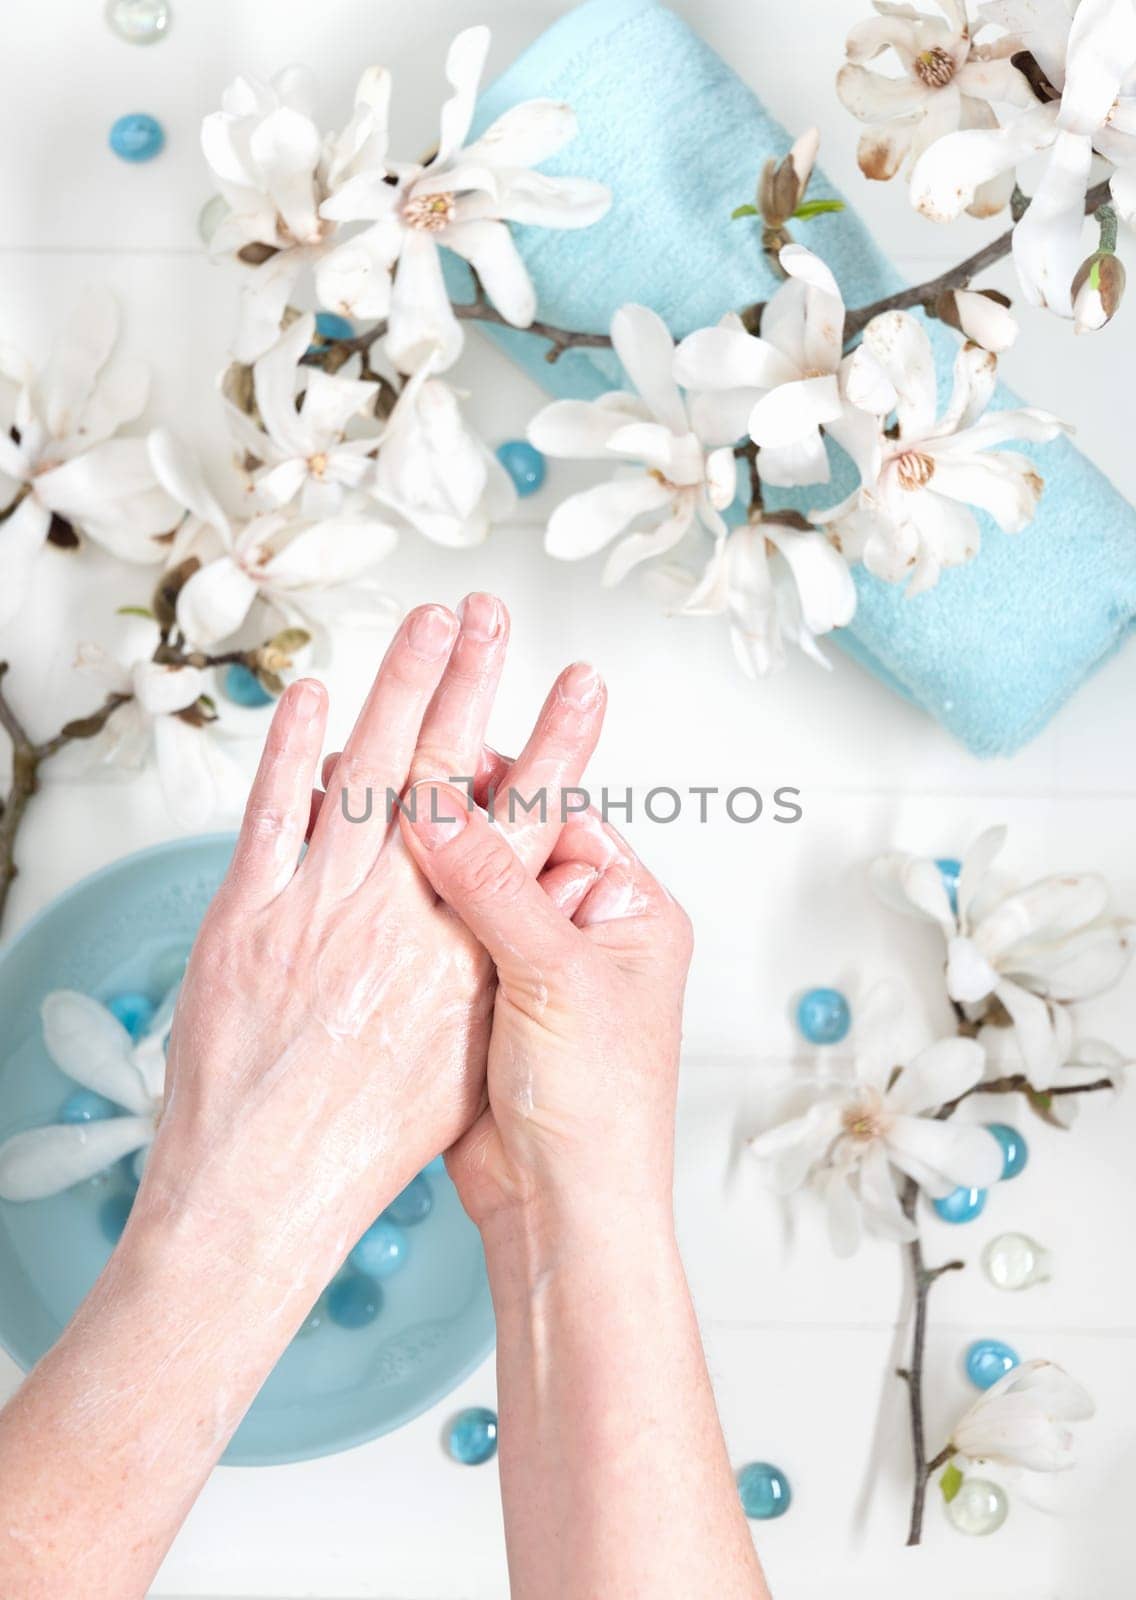 young woman doing step by step finger massage with cream in salon with cup of spring water and blue spa stones and white magnolia flowers, High quality photo